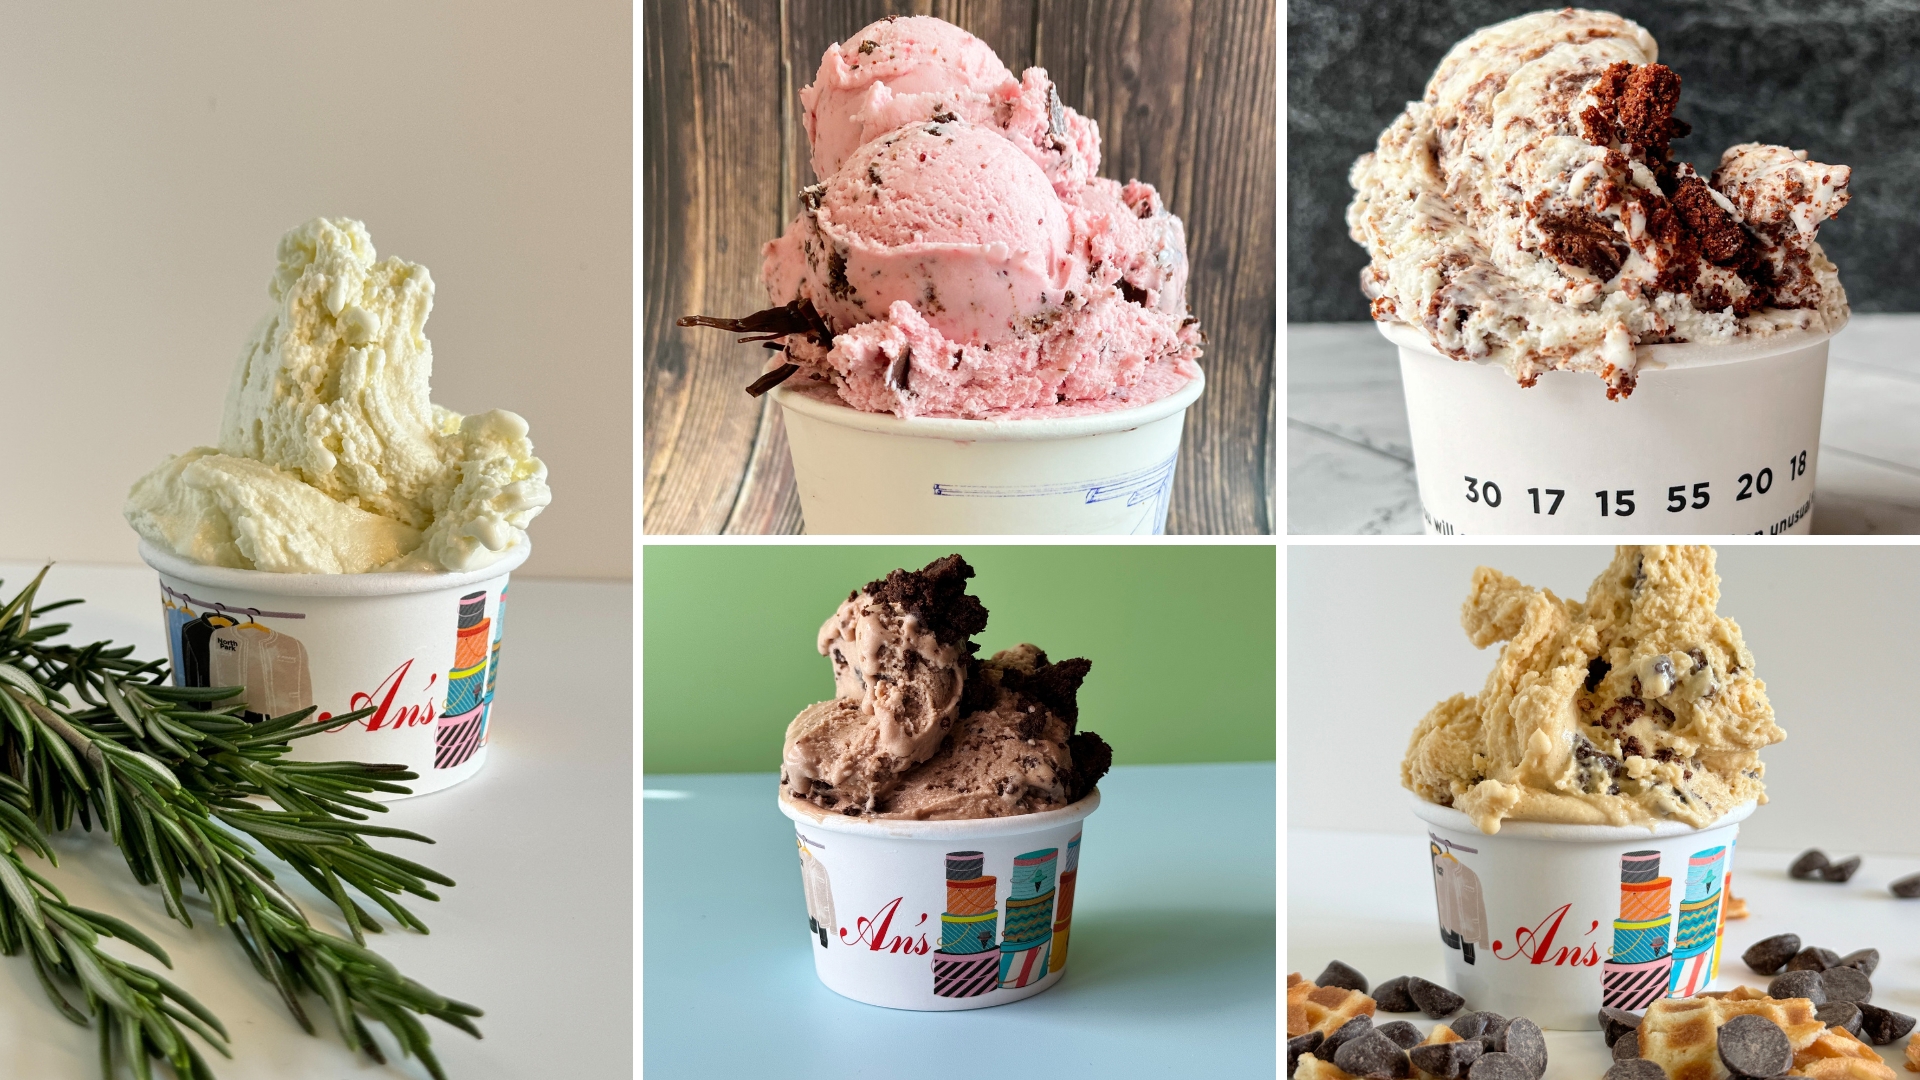 If you're looking for the finest gelato flavors in the country,  An’s Dry Cleaning with 3 locations has you covered this summer.